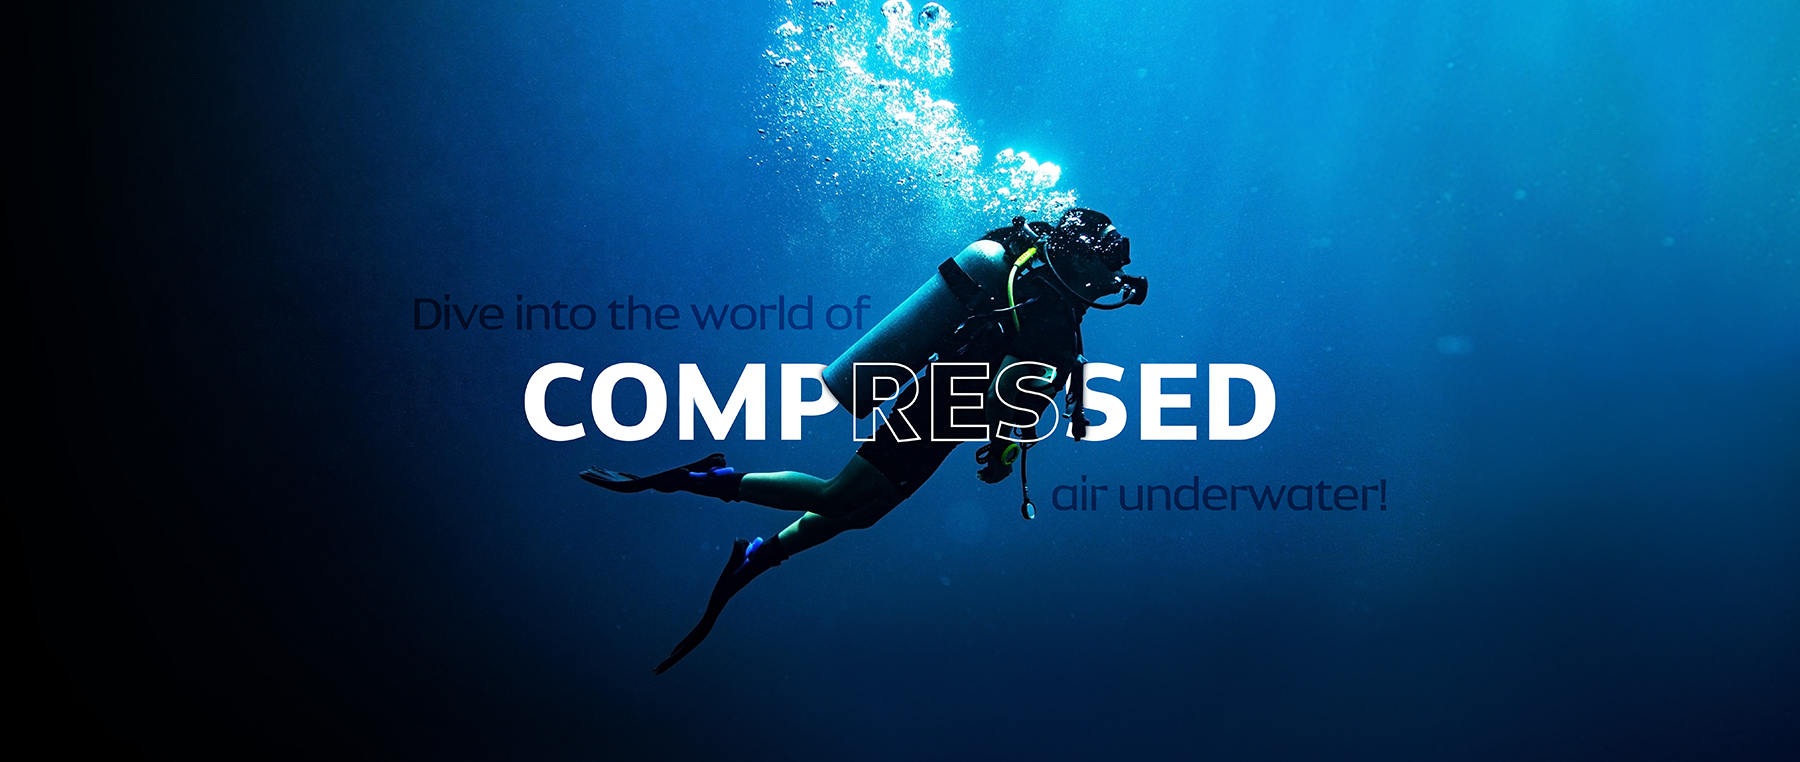 Dive into the world of compressed air underwater!